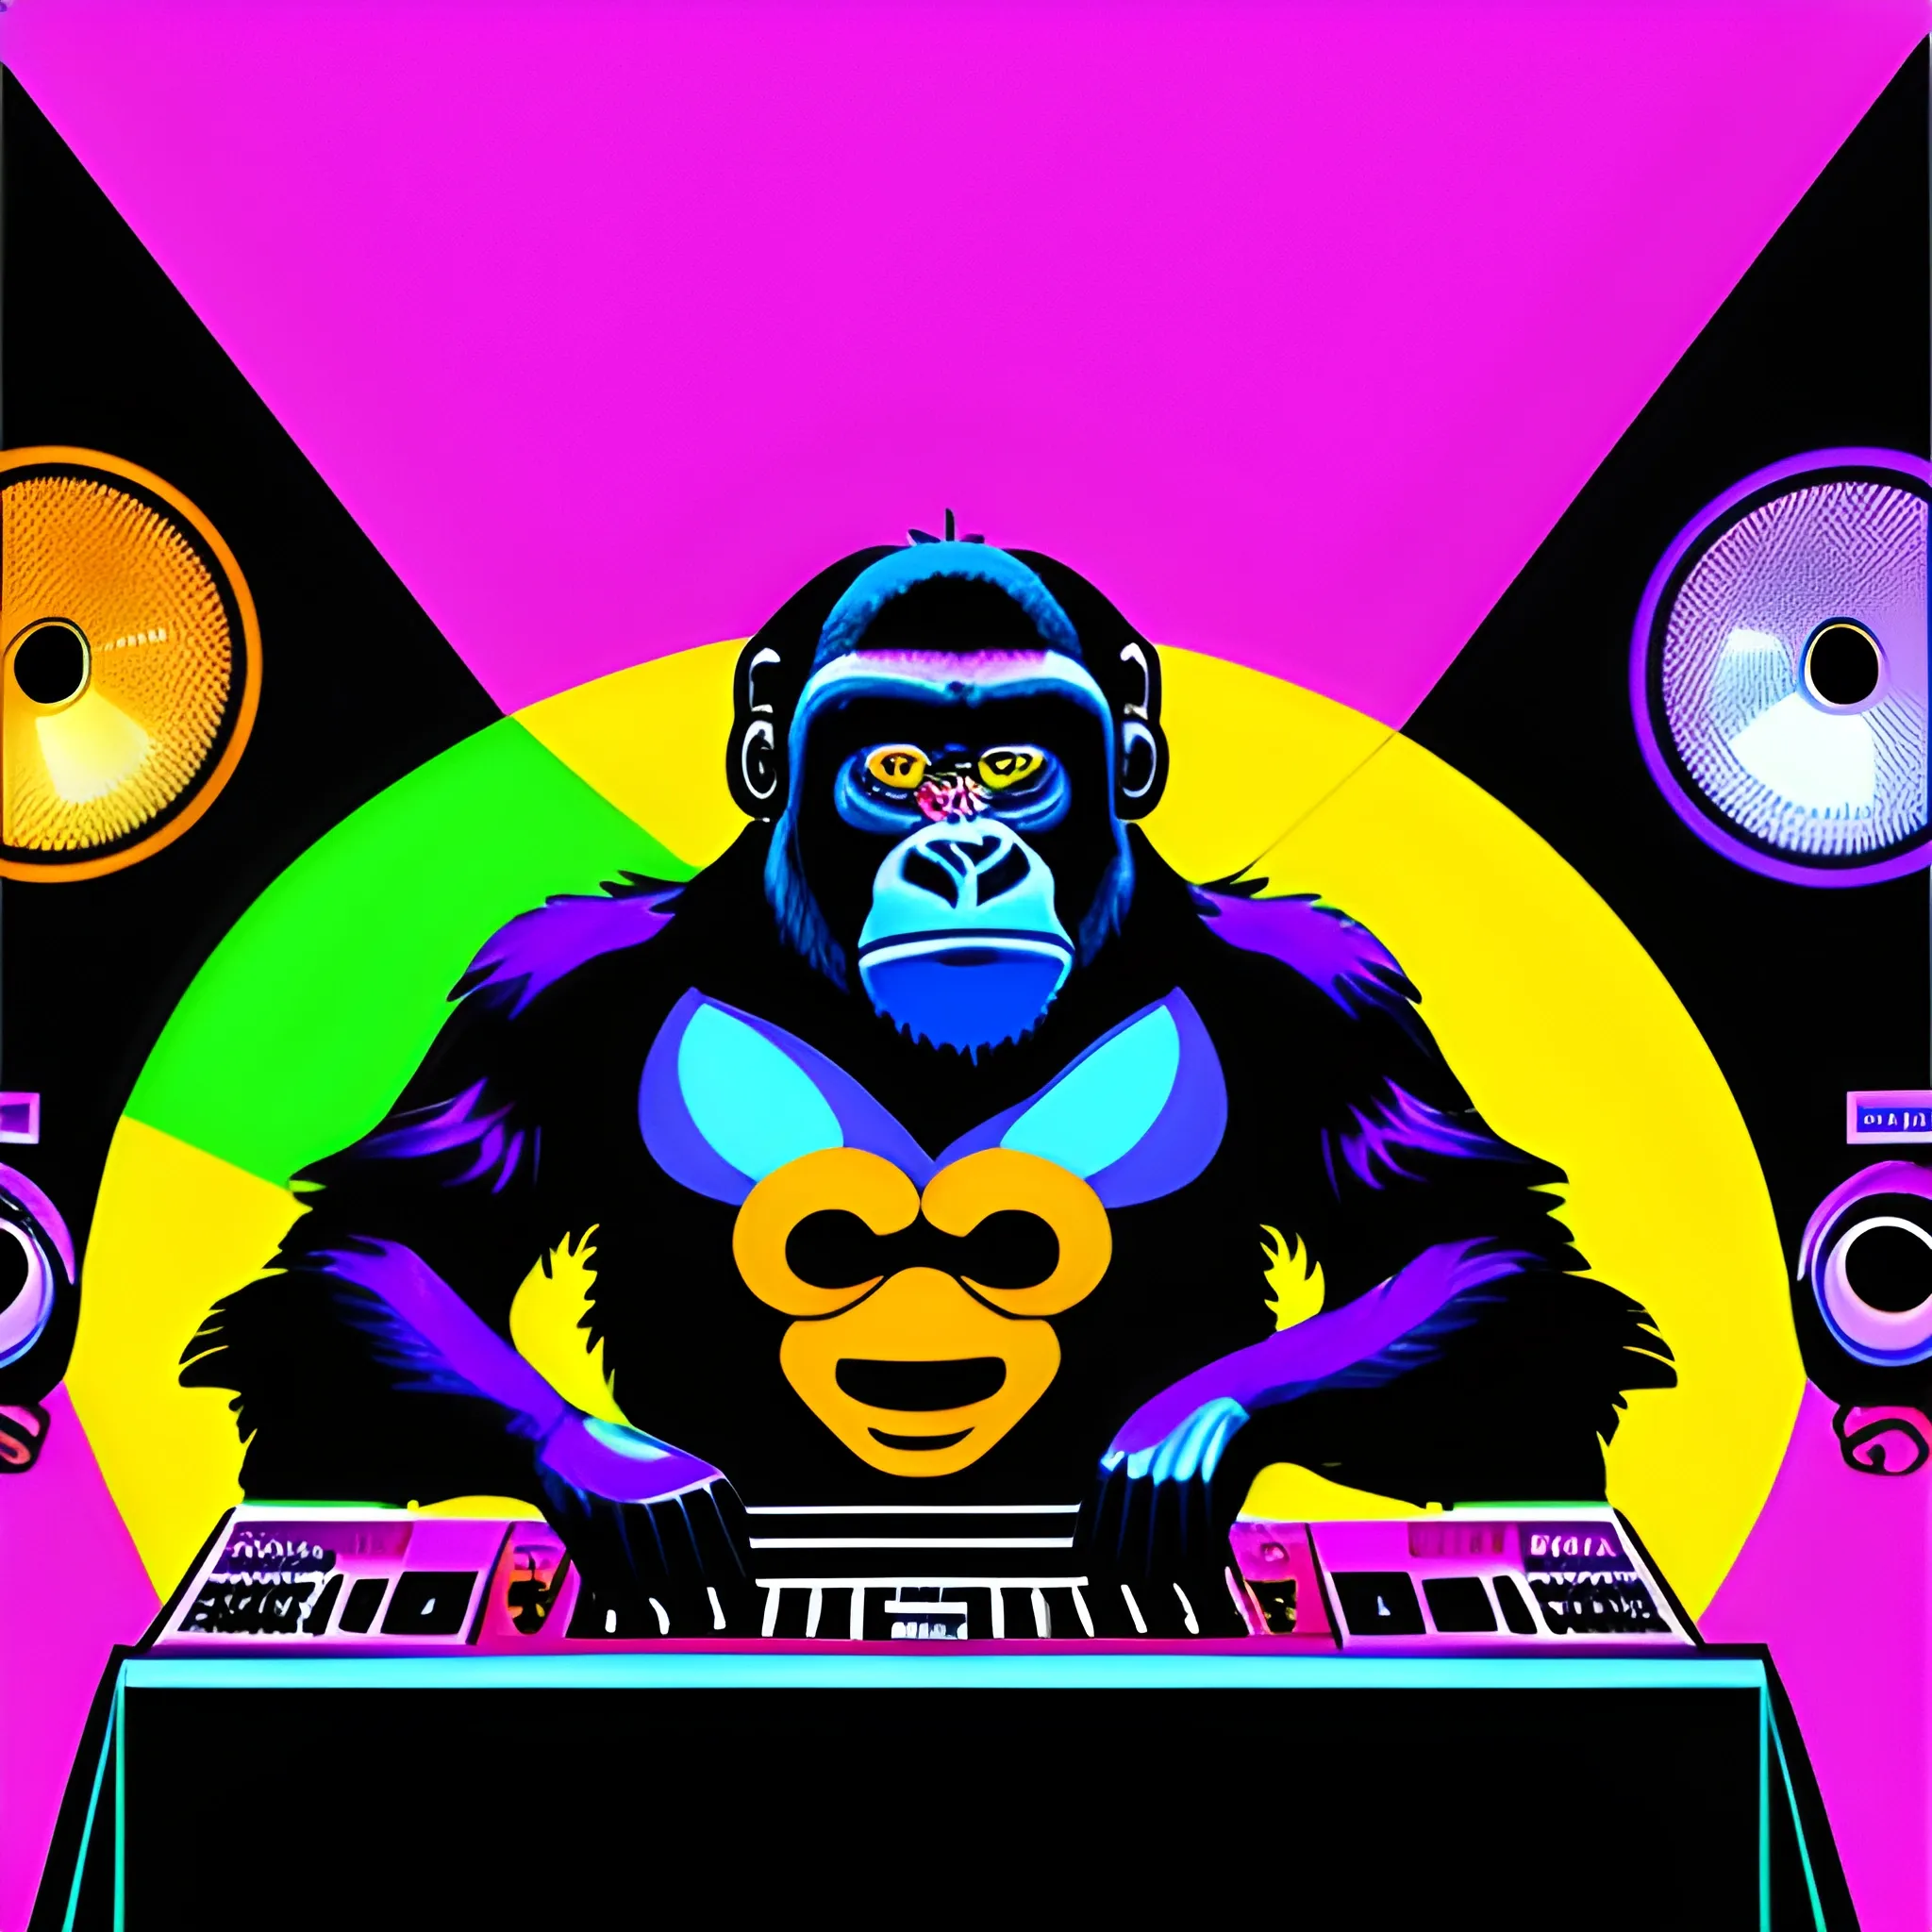 Gorilla dj, Cartoon, behind the table with black cloth written "FEA USP", runway full of people, set of speakers playing, colorful lights